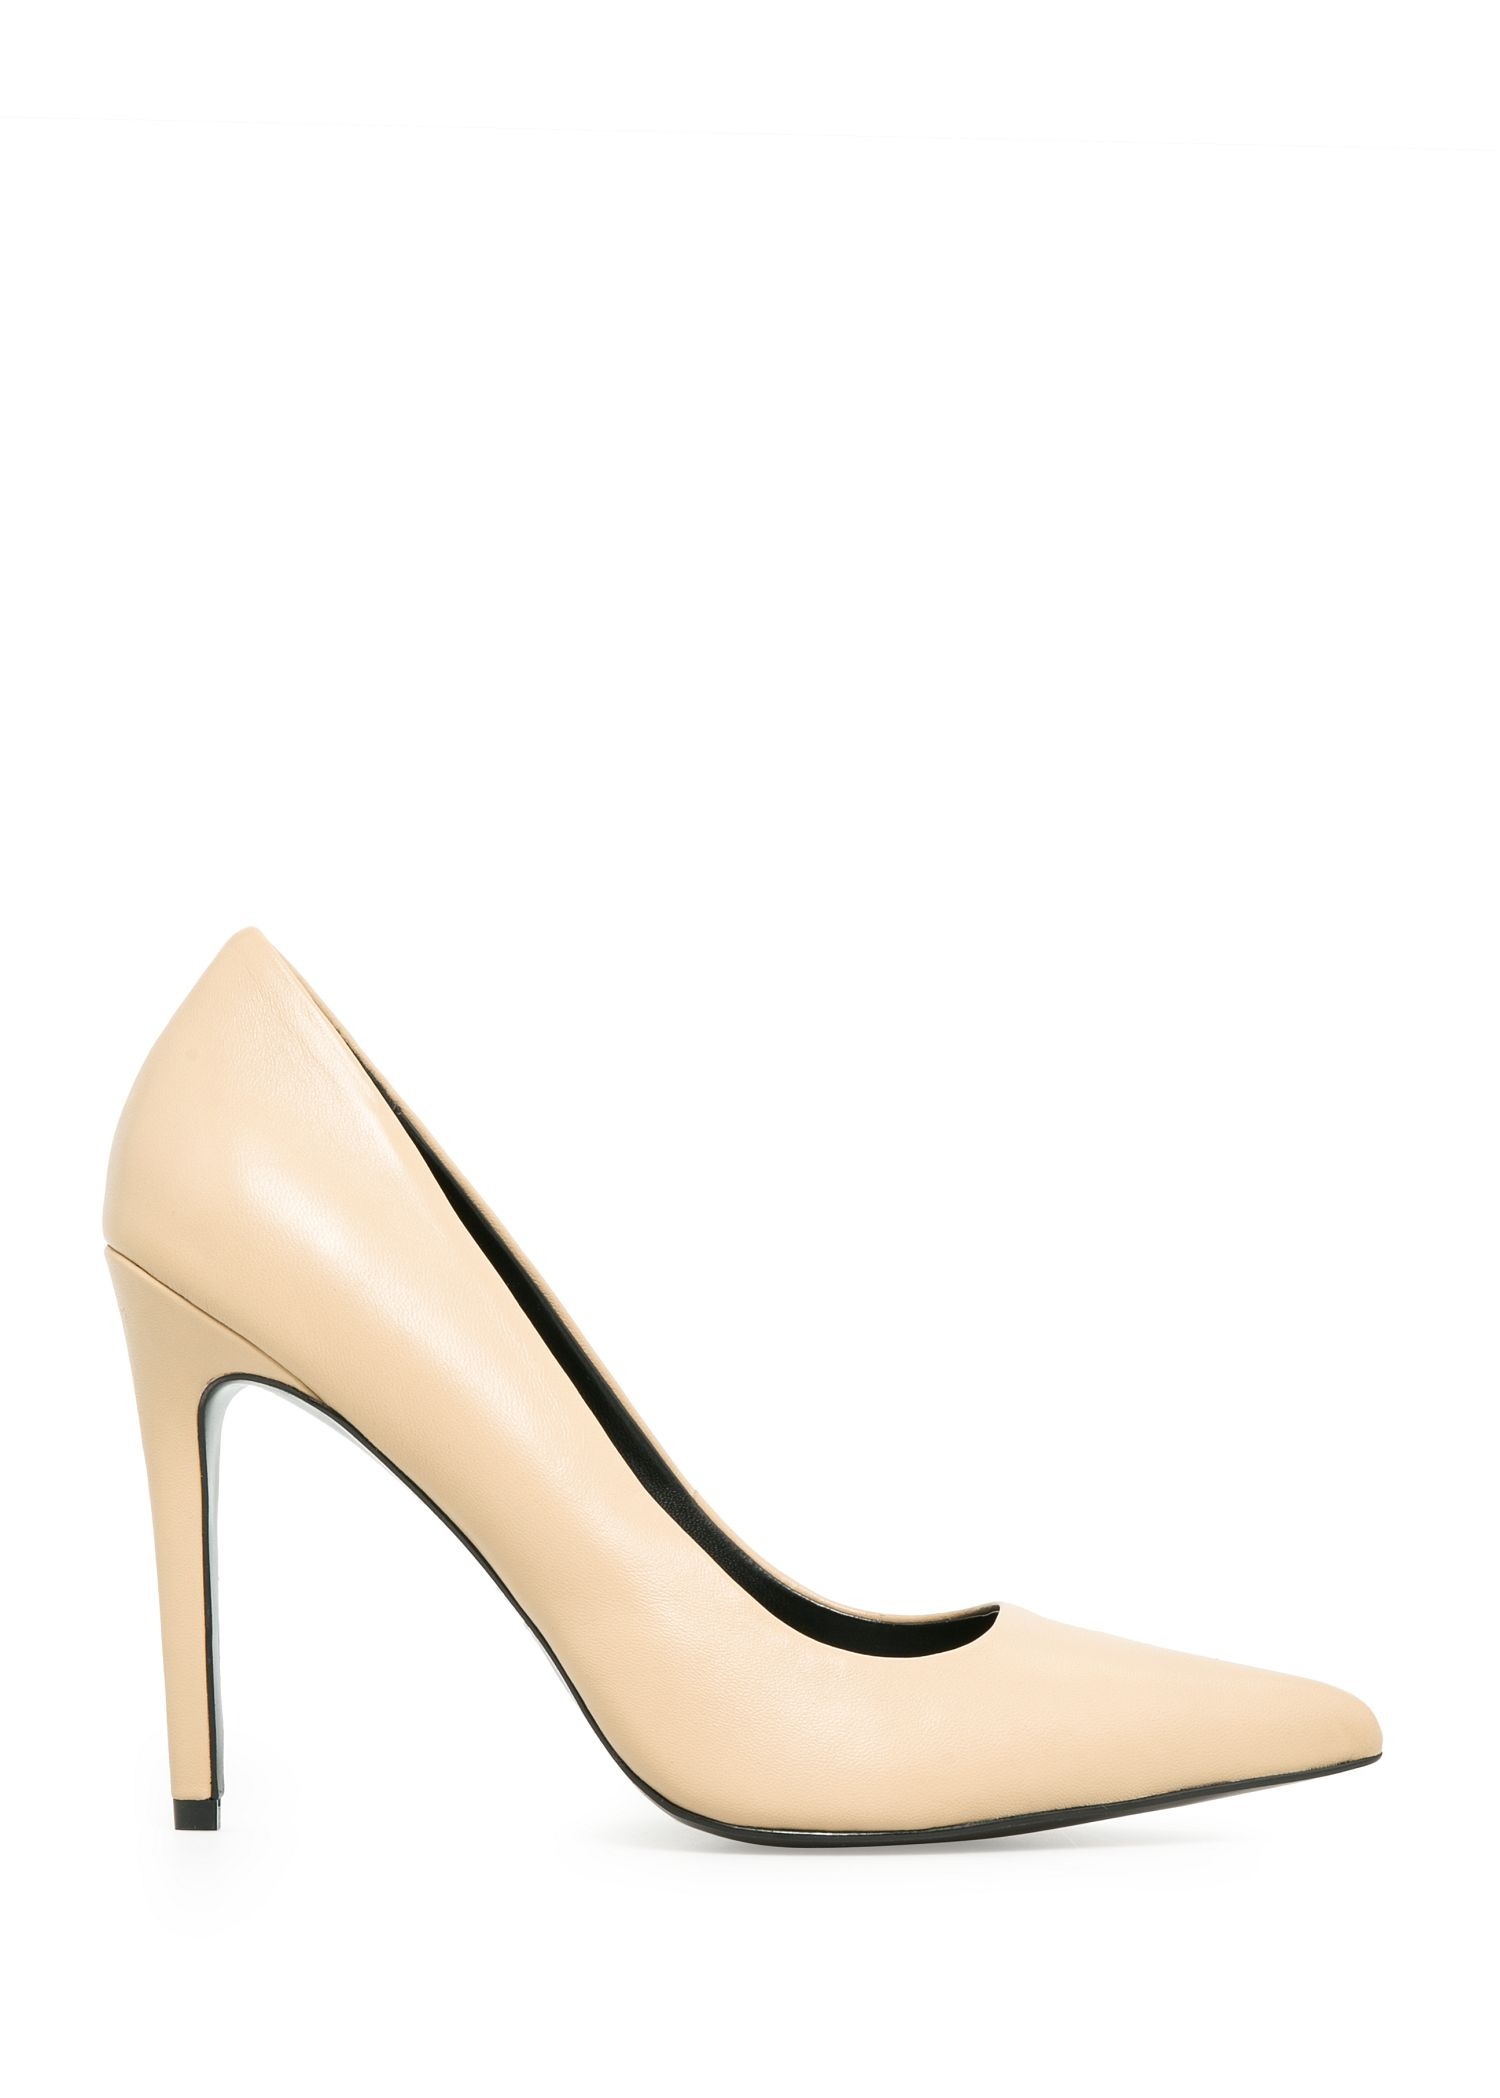 Lyst - Mango Leather Pumps in Natural